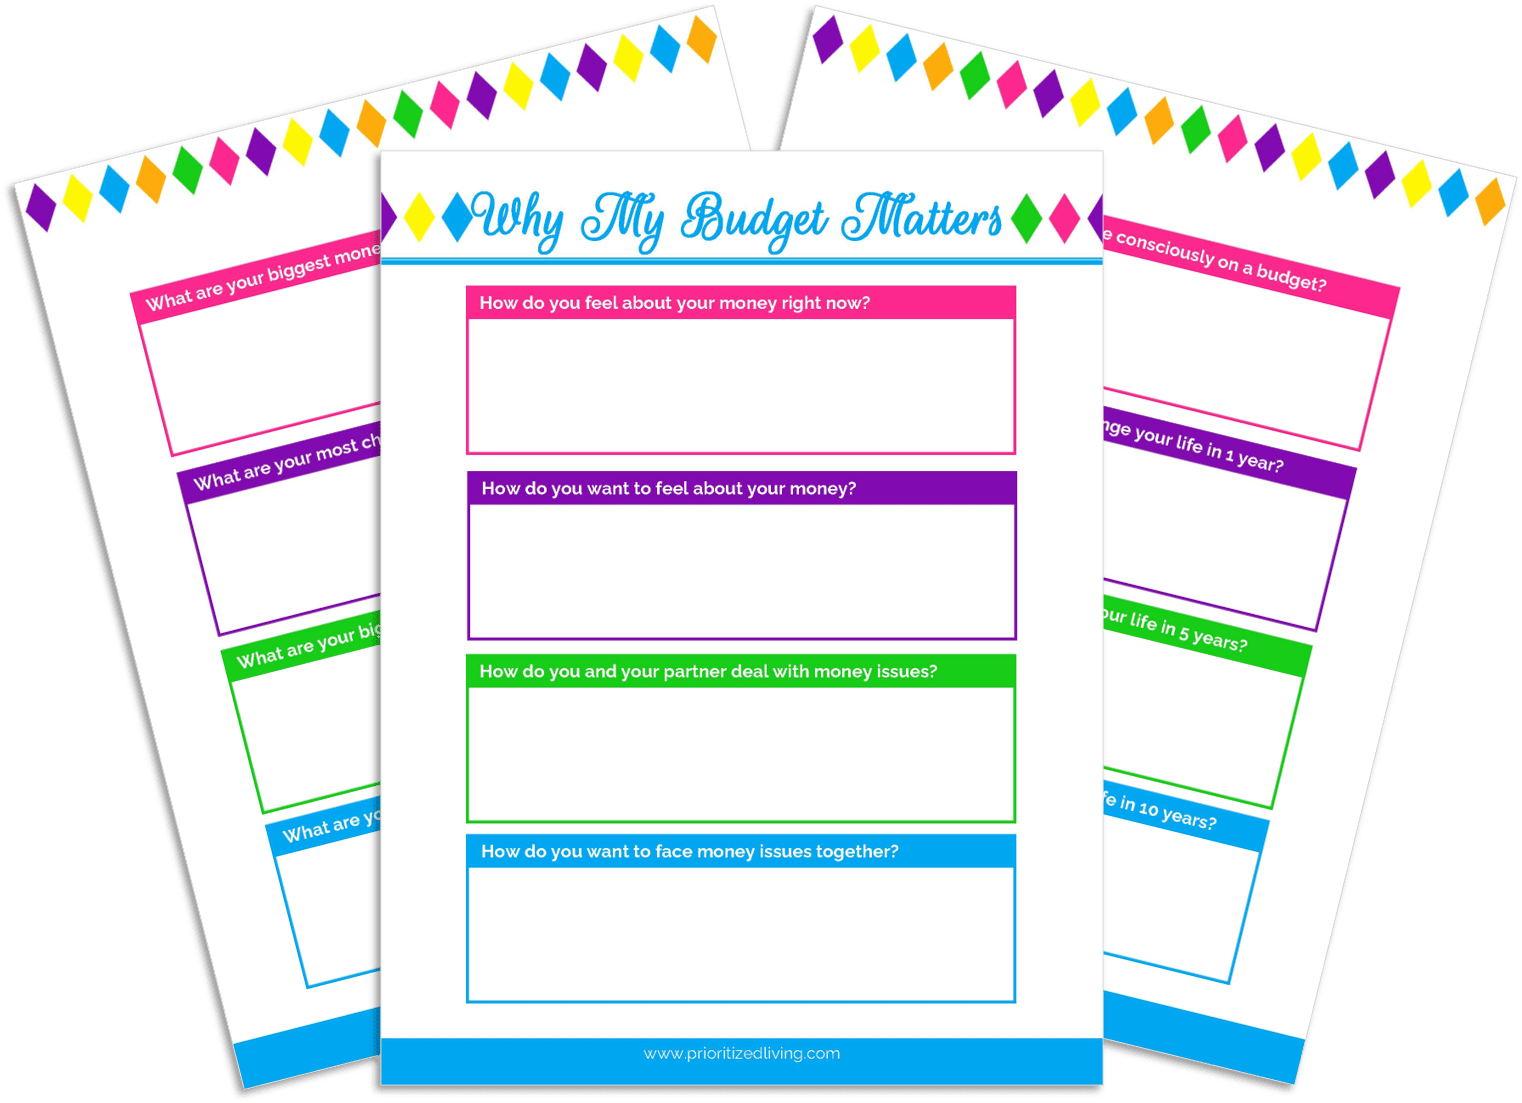 Why My Budget Matters